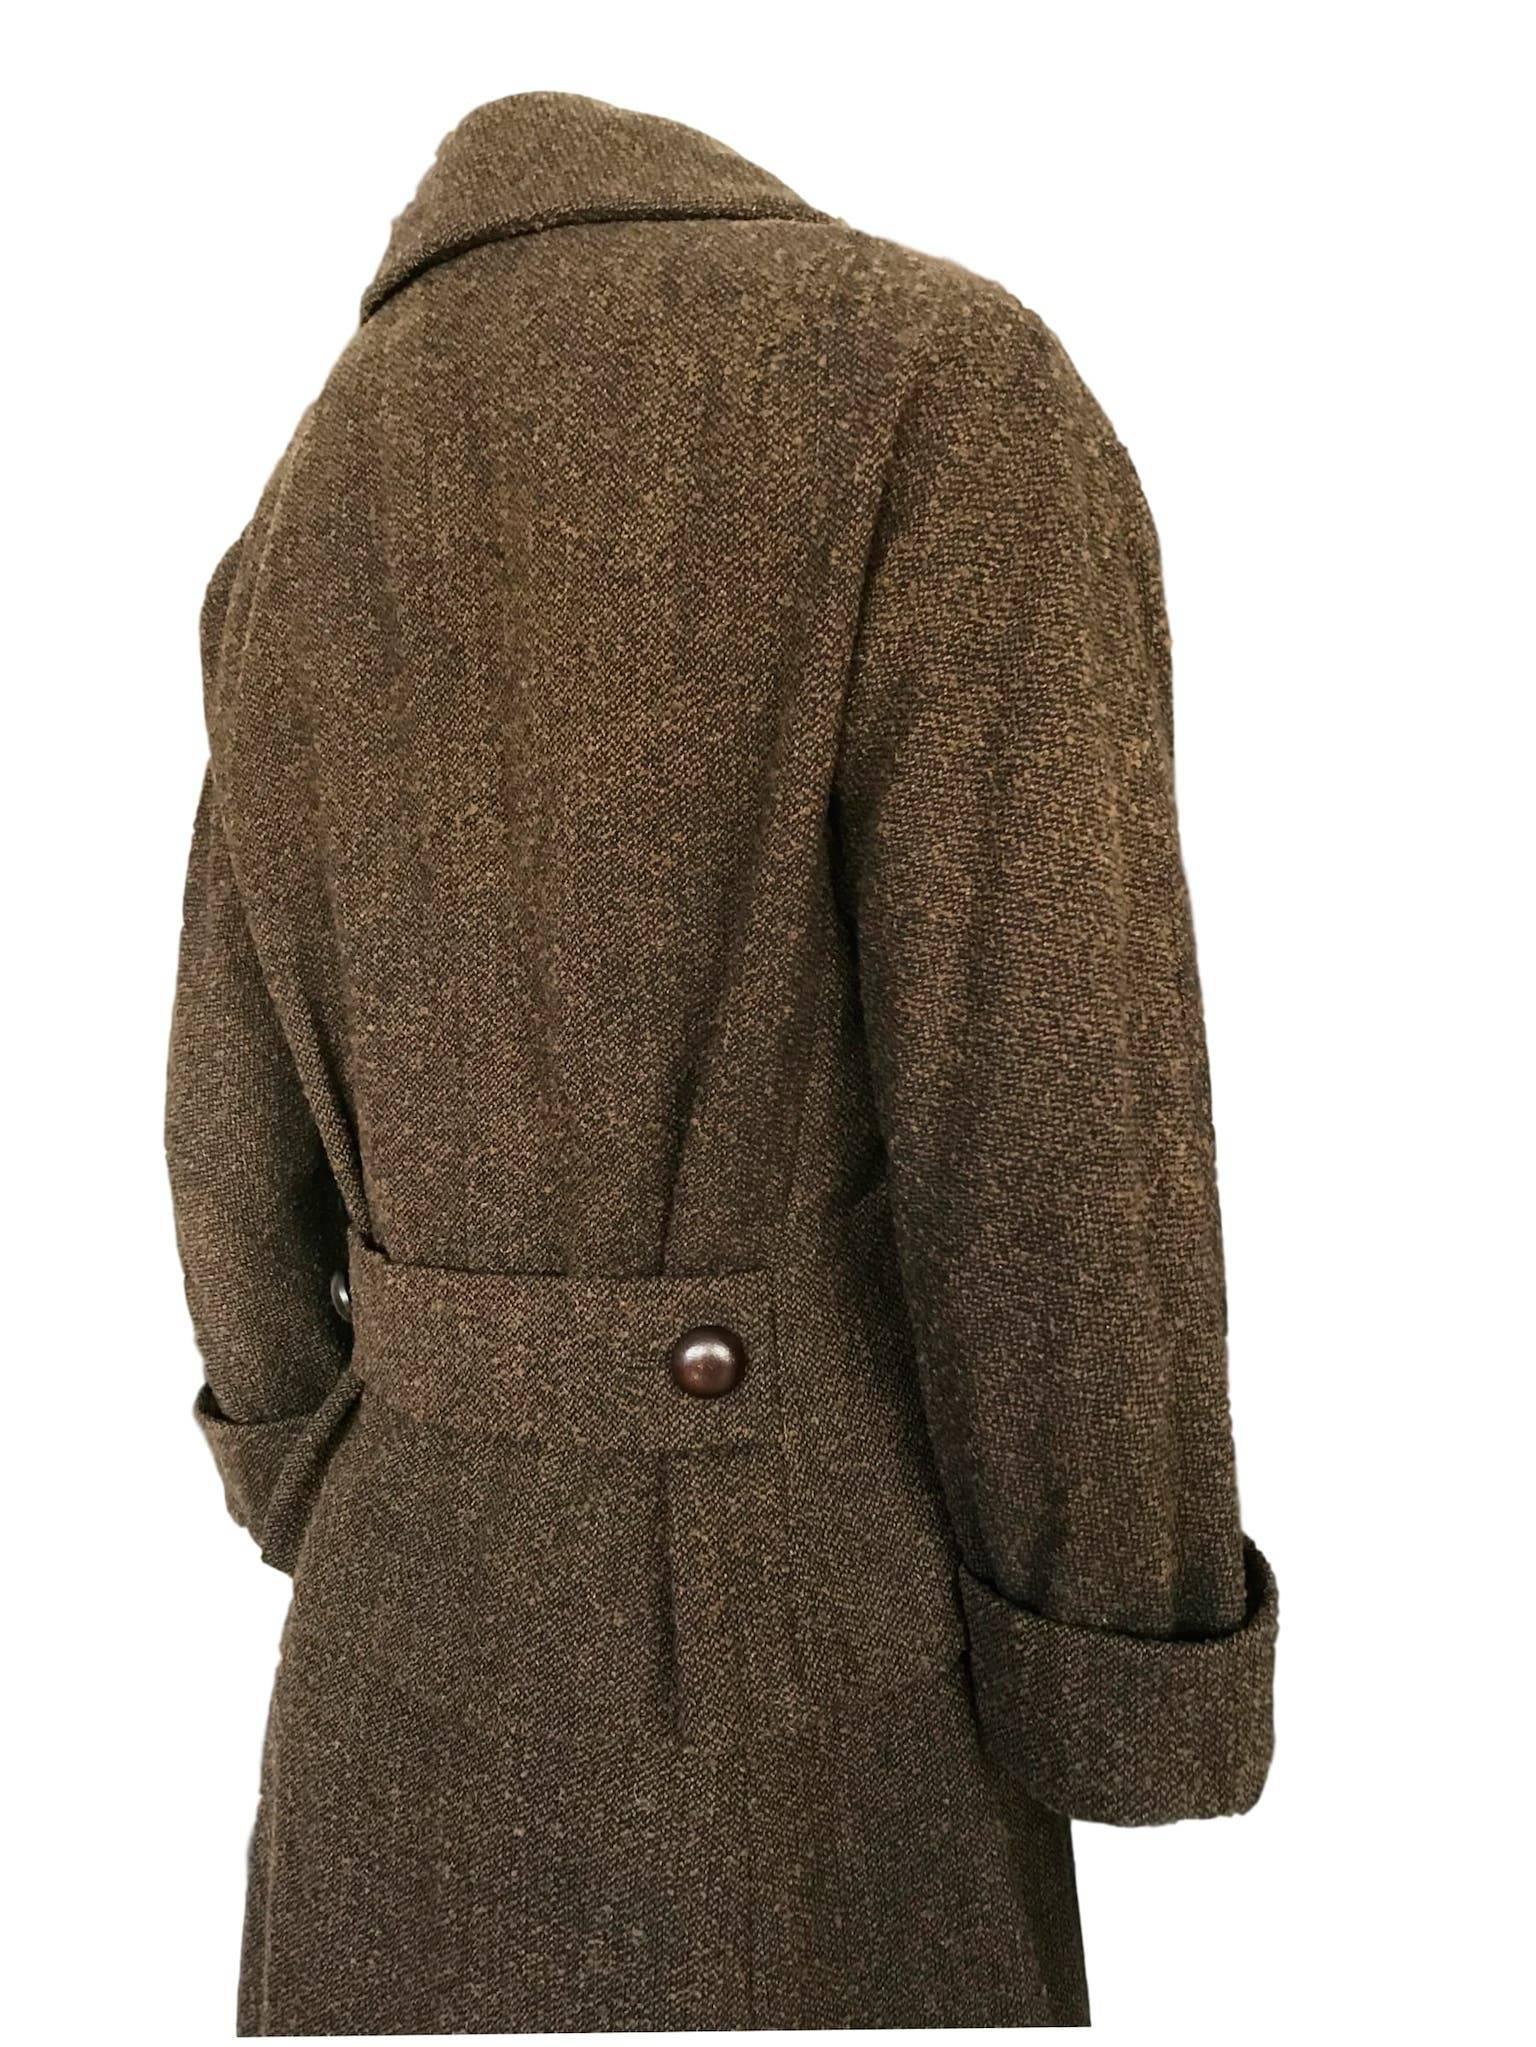 Women's or Men's 1950s Christian Dior New York Brown Boucle Wool Skirt Jacket 2 Piece Suit 